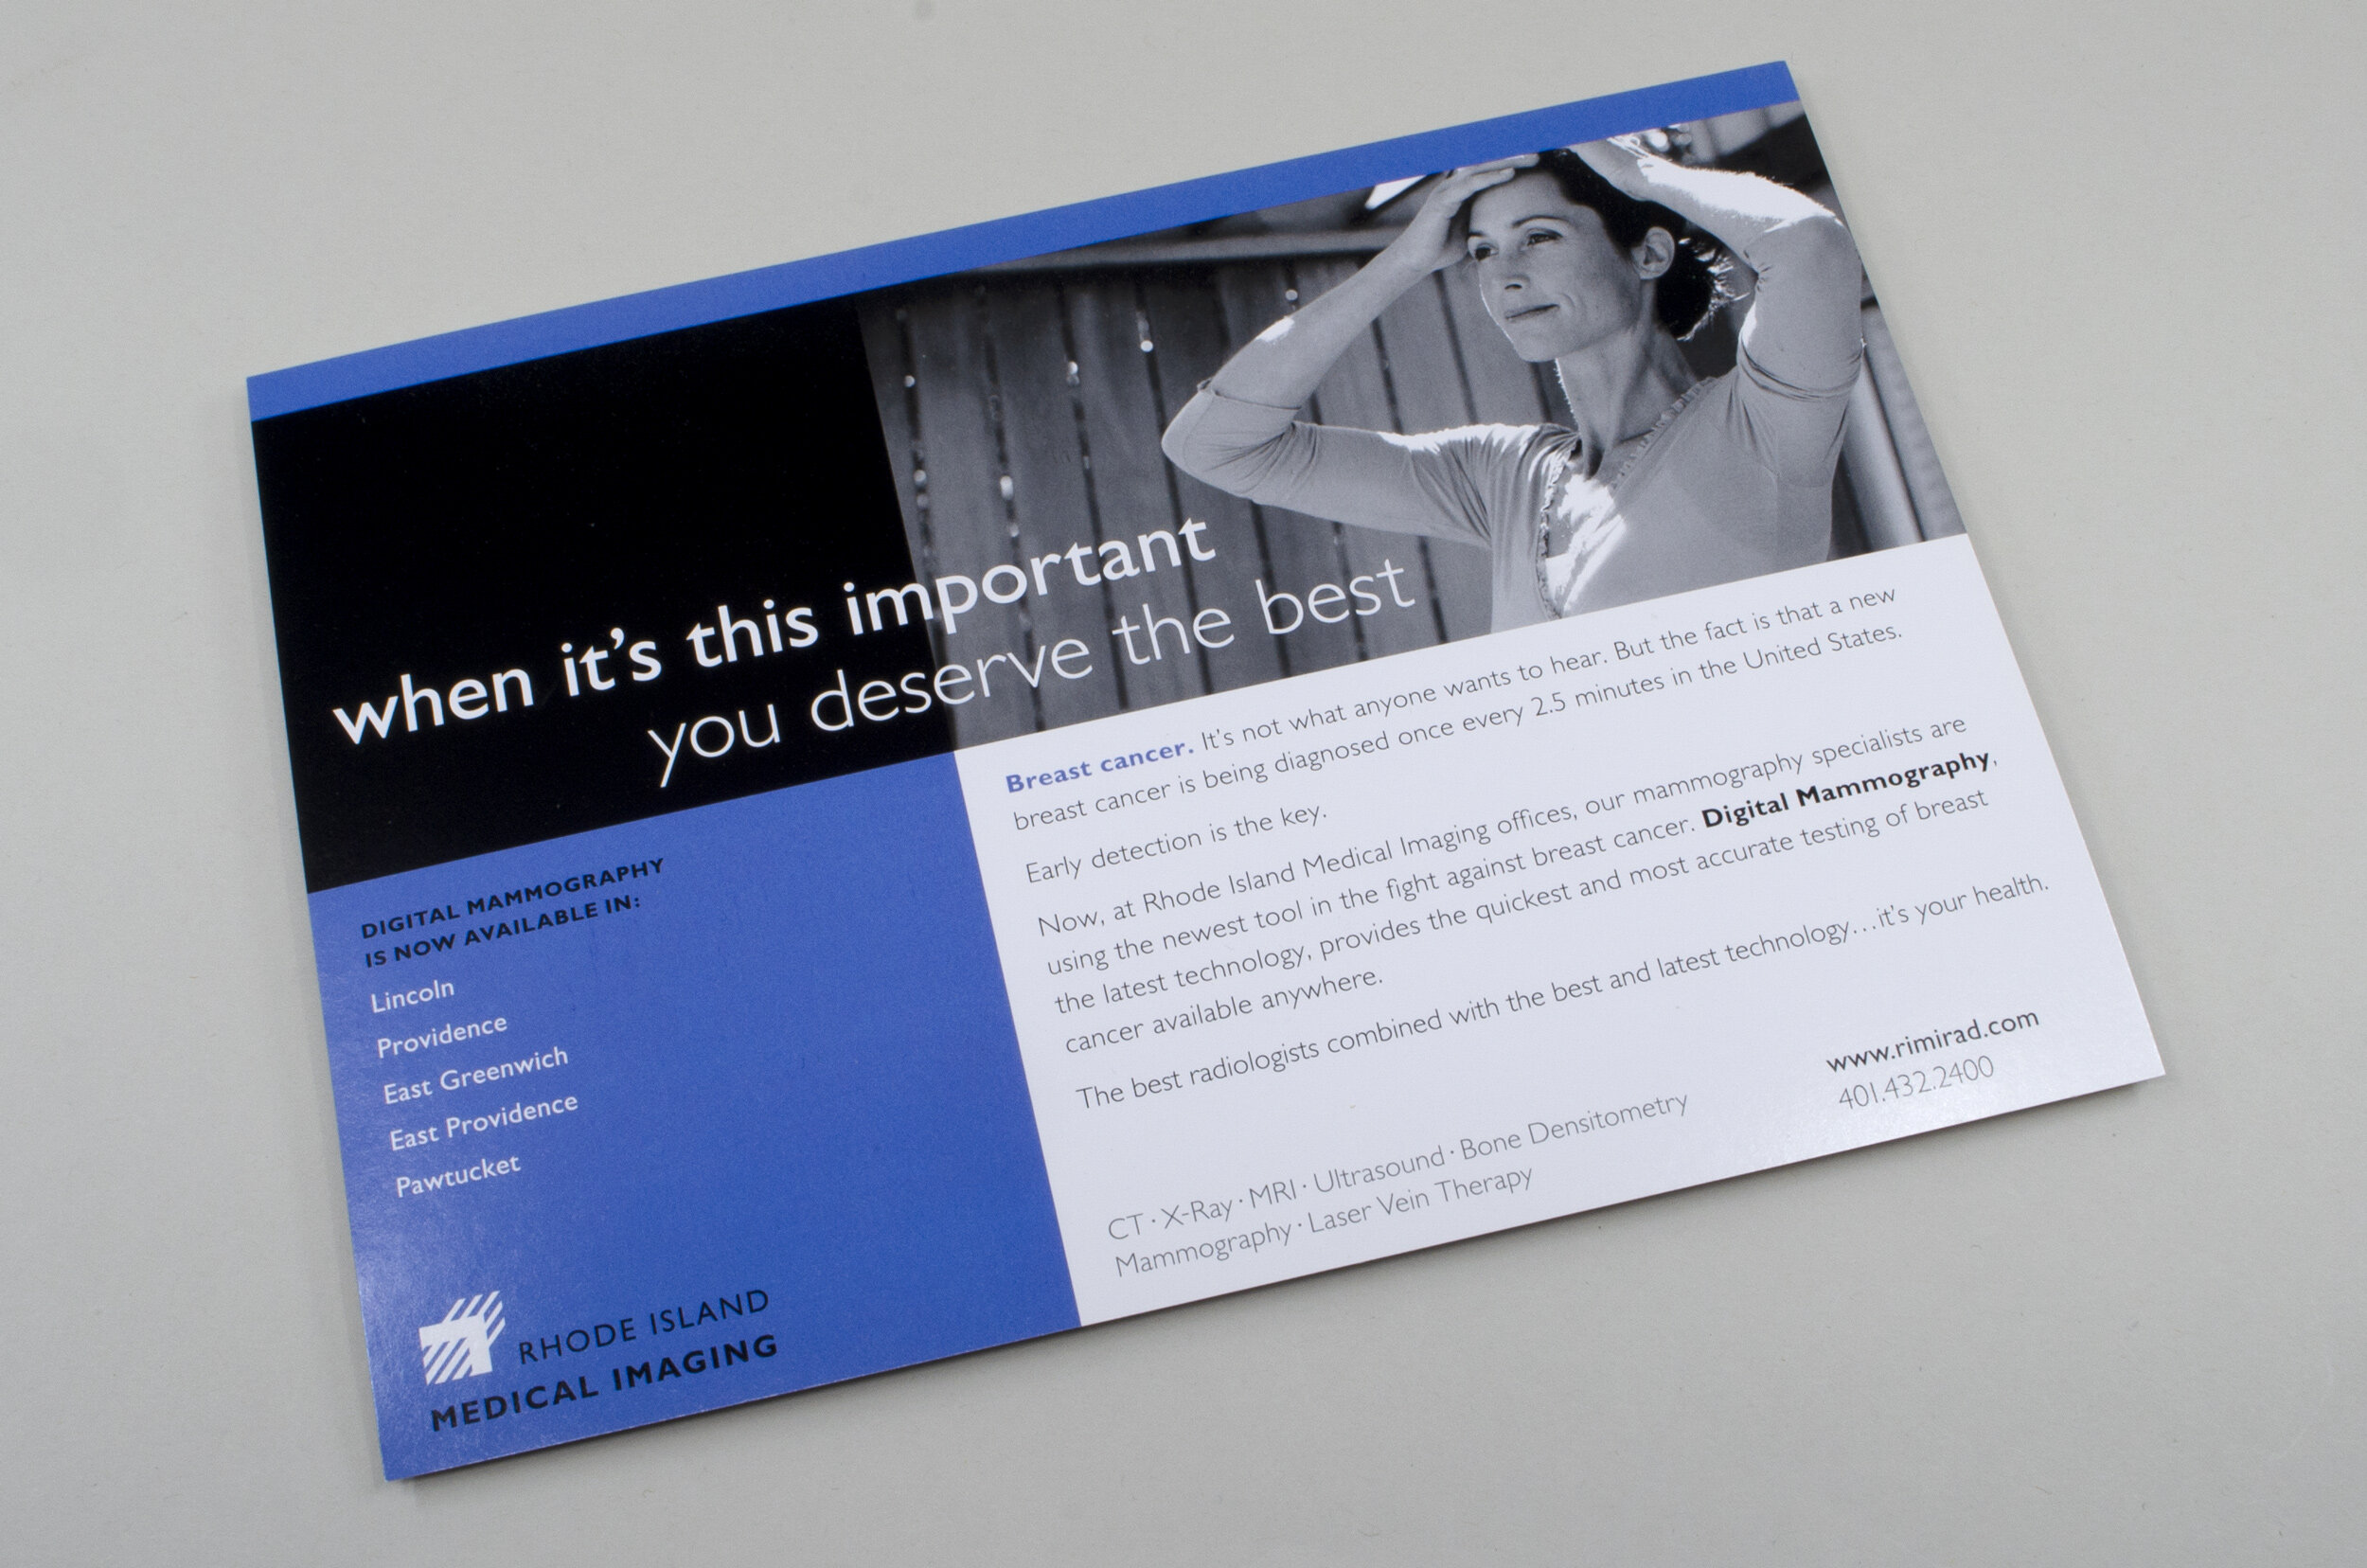   promotional postcard  • designer: Michael Balint • copy and direction: Acadia Consulting Group 